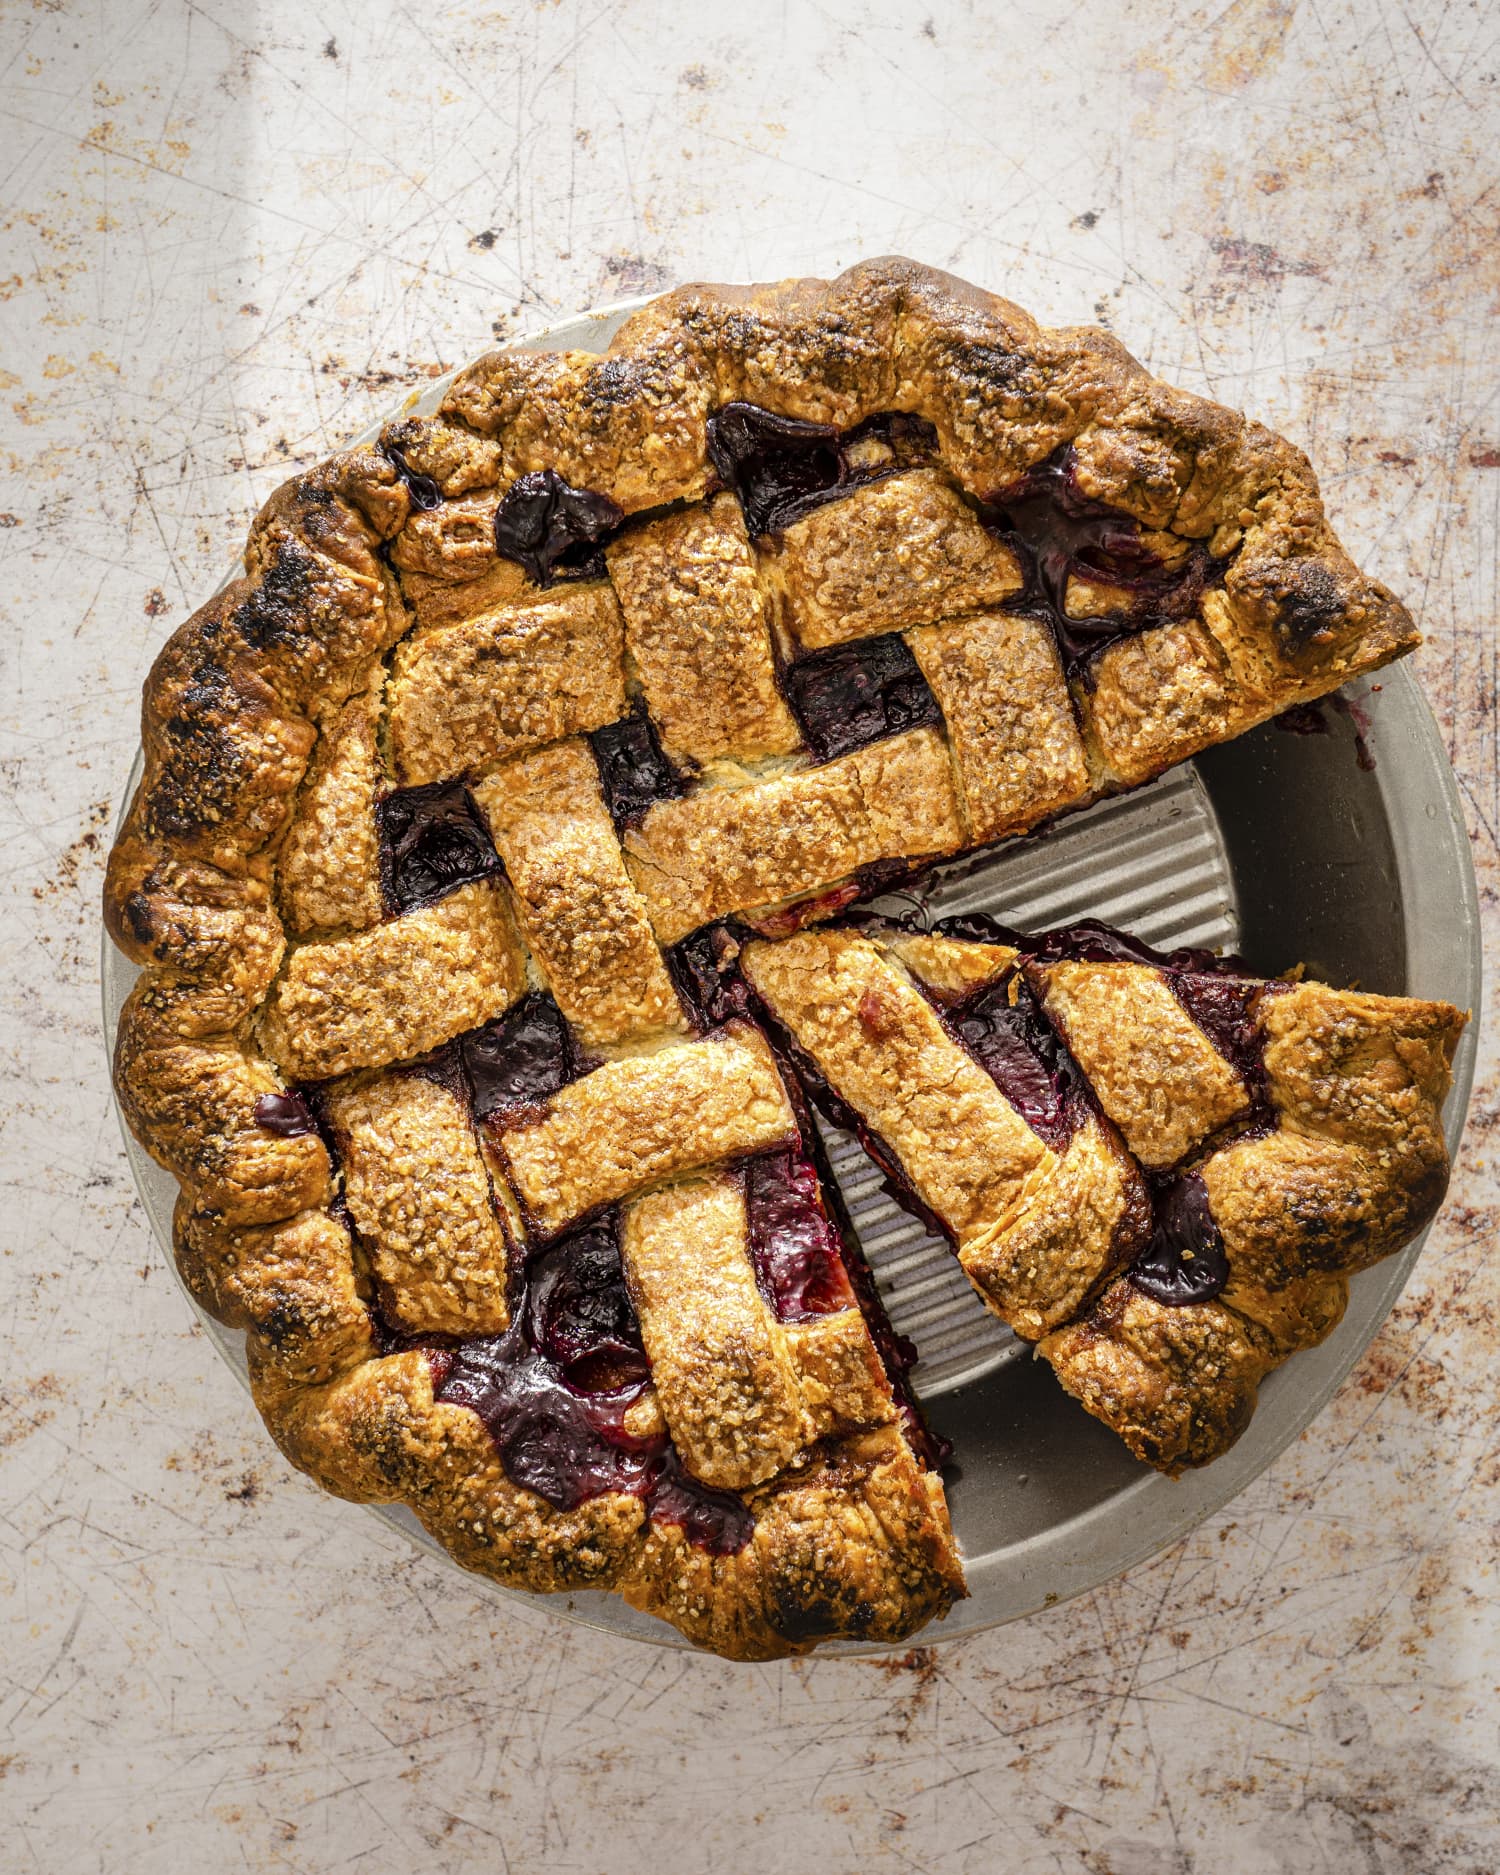 This Peach Blueberry Pie Is the Ultimate Fruity Pastry